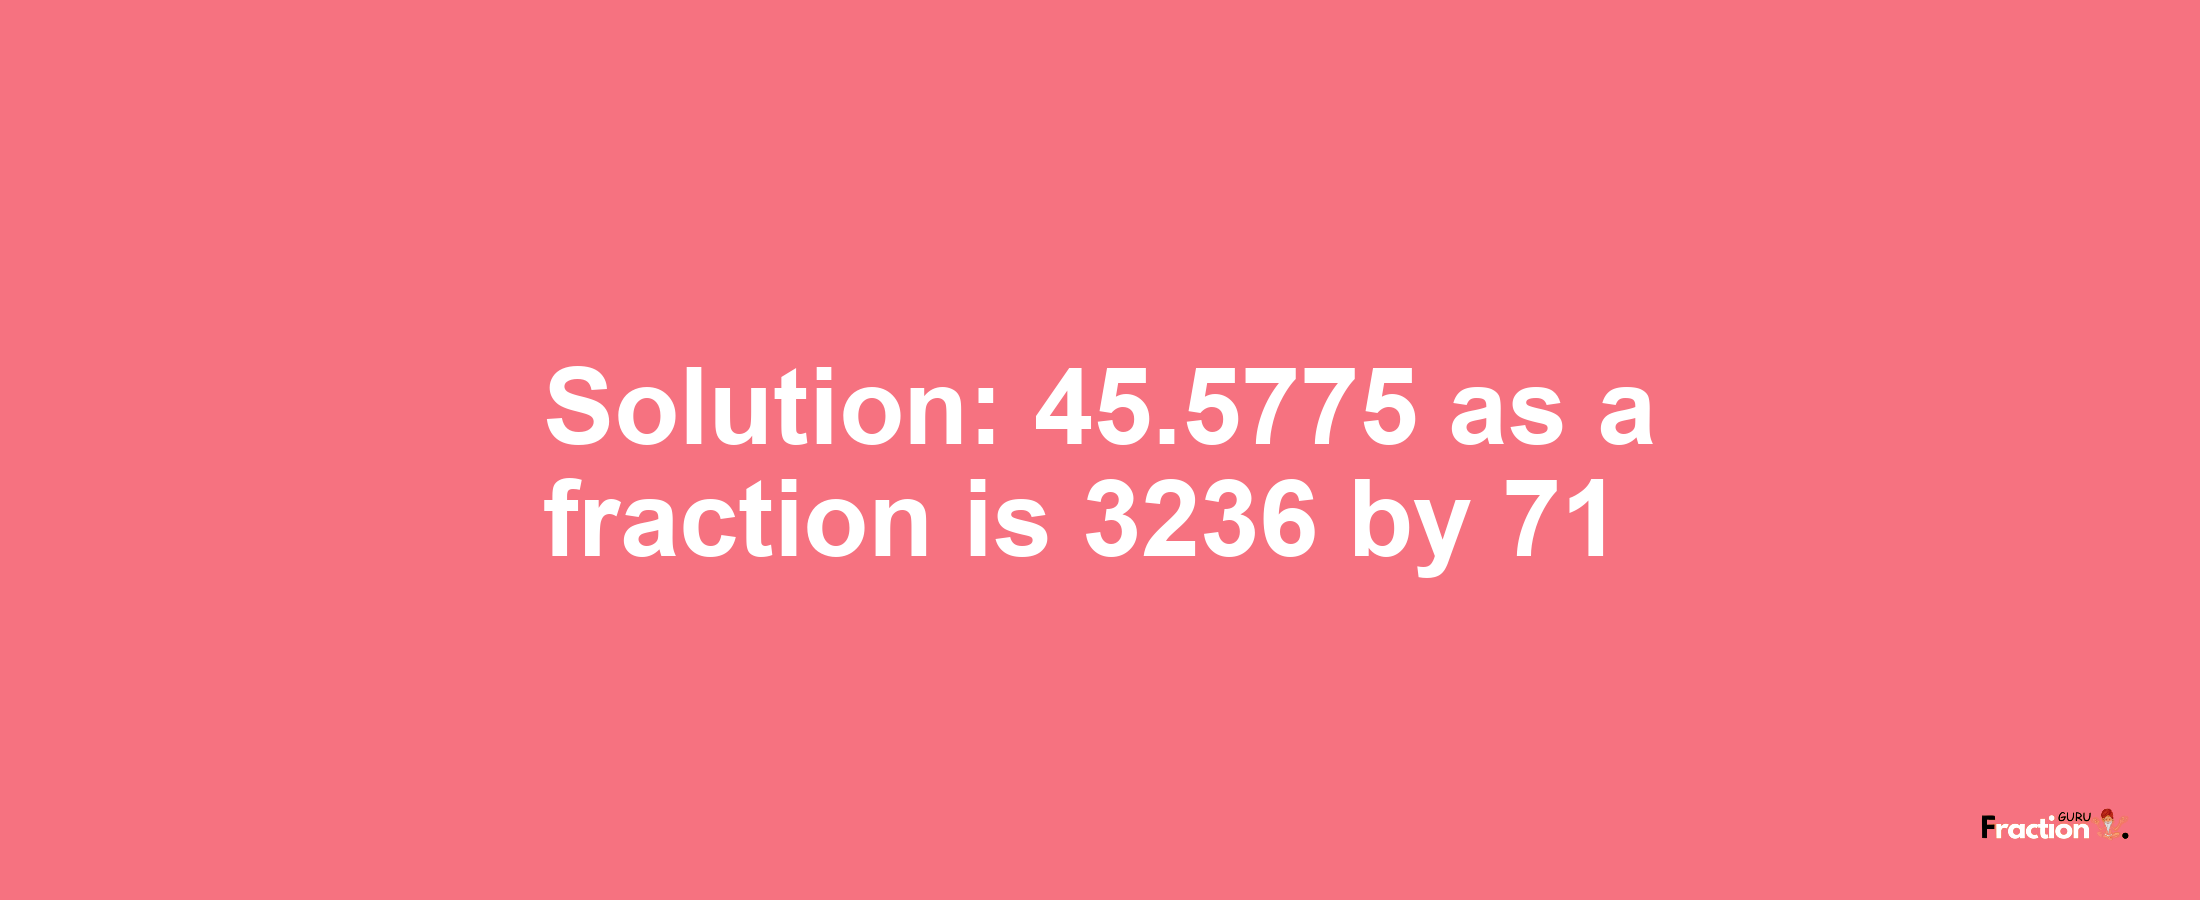 Solution:45.5775 as a fraction is 3236/71